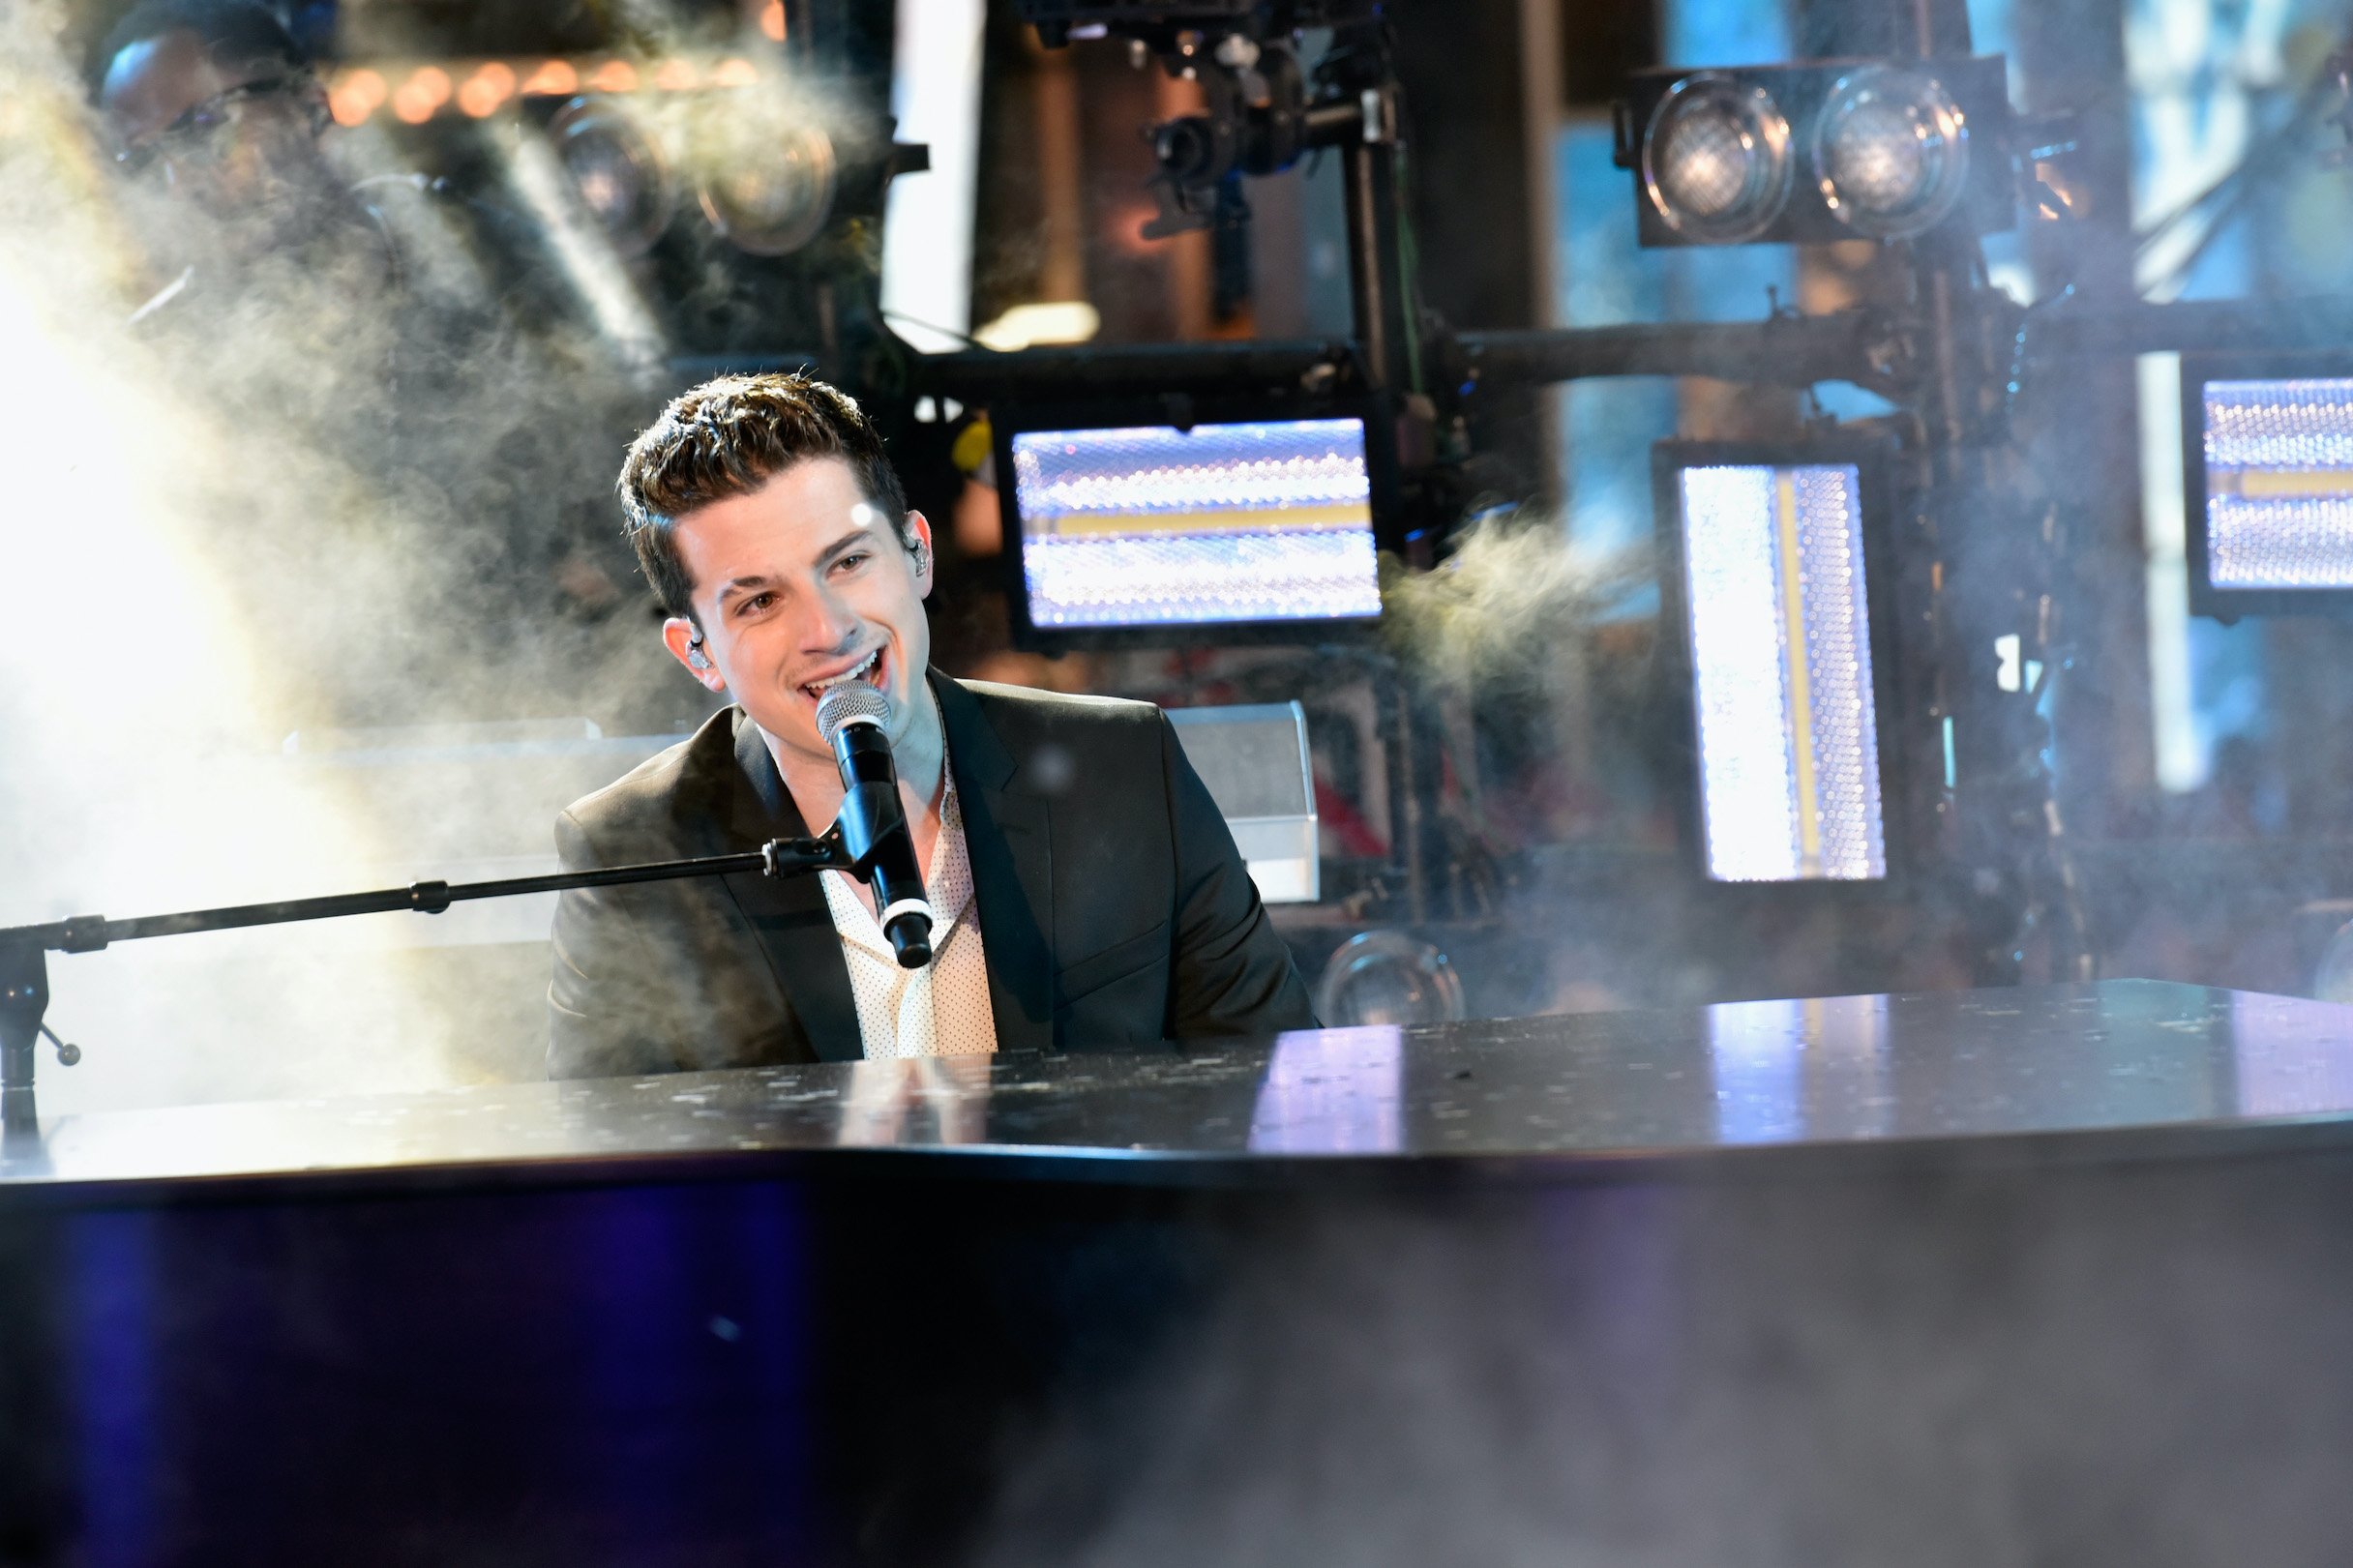 Charlie Puth performs See You Again with Wiz Khalifa at 2016's New Year's Eve celebration at Times Square